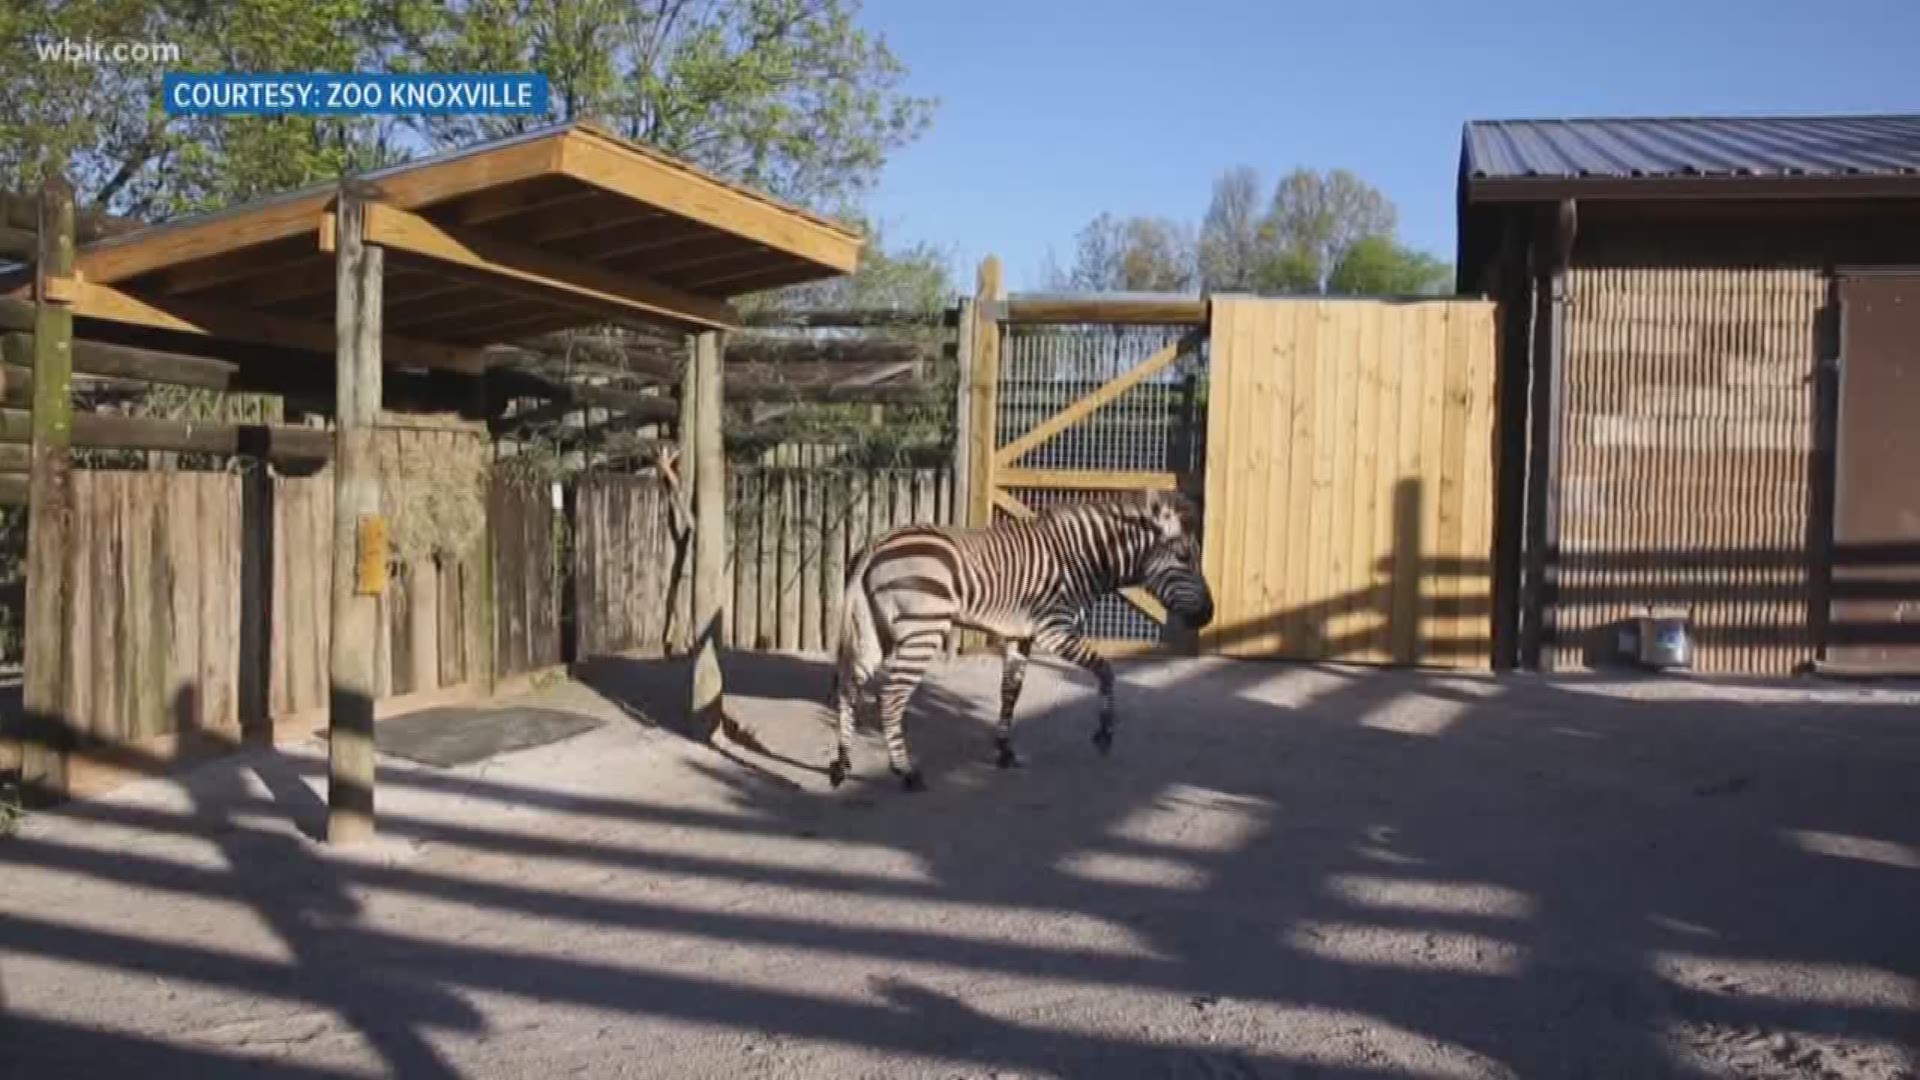 April 23, 2018: Zoo Knoxville is welcoming its newest arrivals - a trio of mountain zebras.